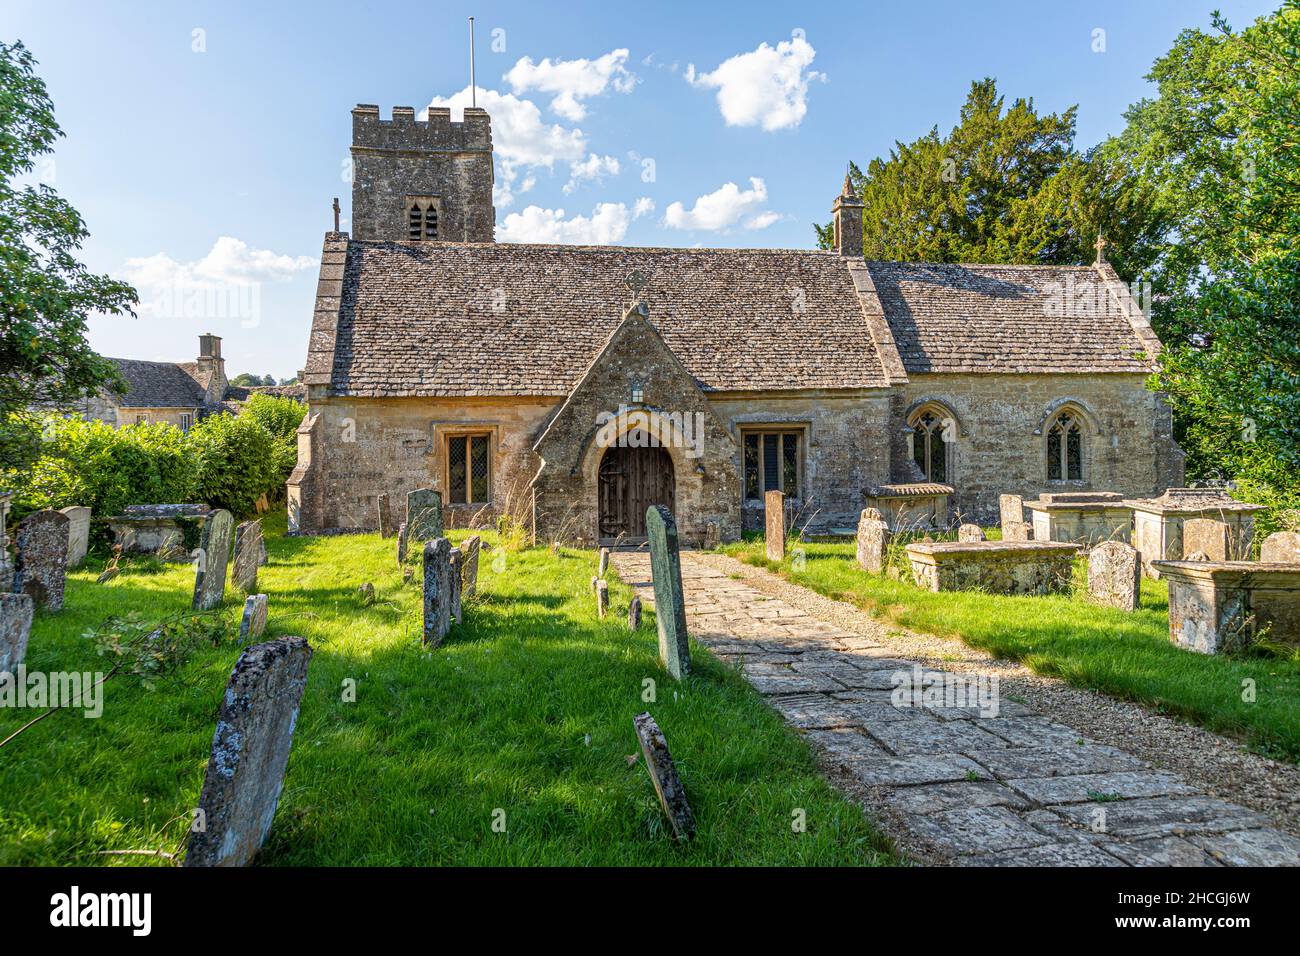 The 12th century Norman church of St Peter in the Cotswold village of Little Barrington, Gloucestershire UK Stock Photo